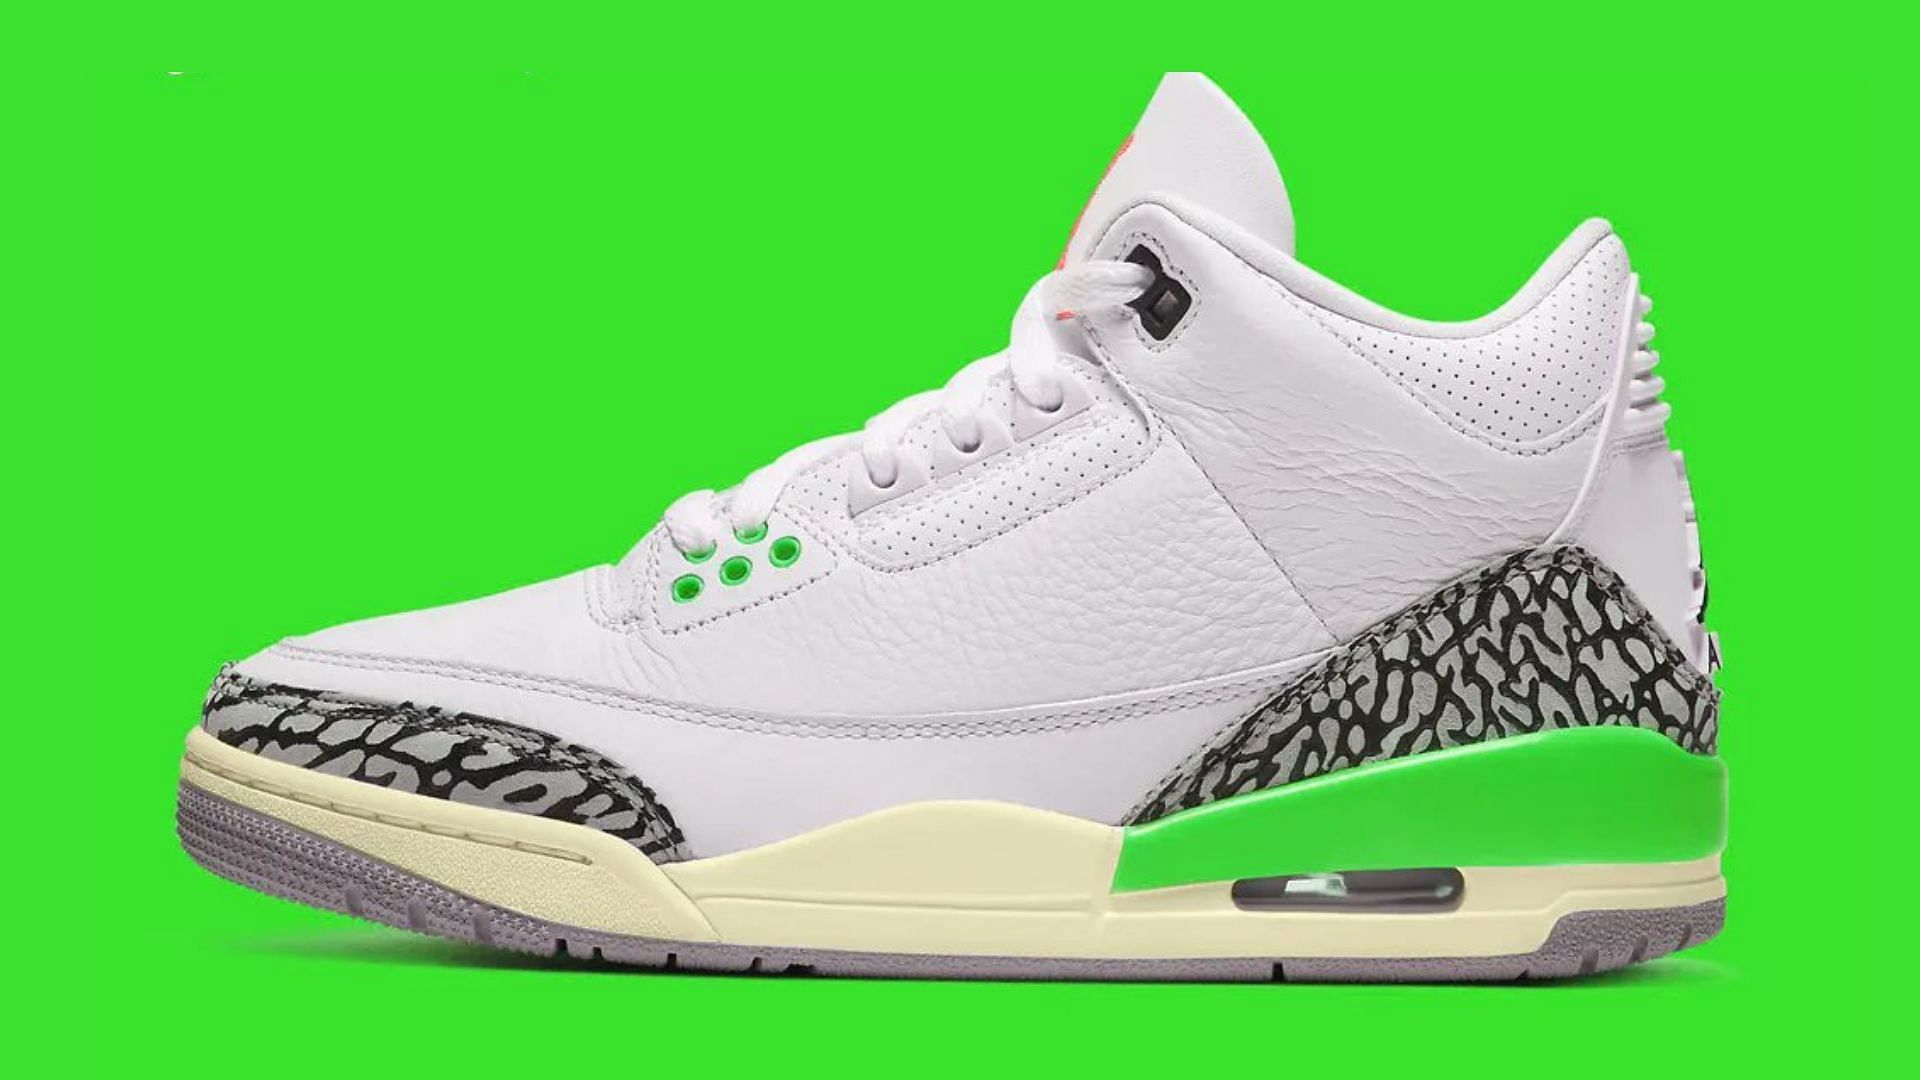 Where to buy Air Jordan 3 “Lucky Green” shoes? Price, release date, and